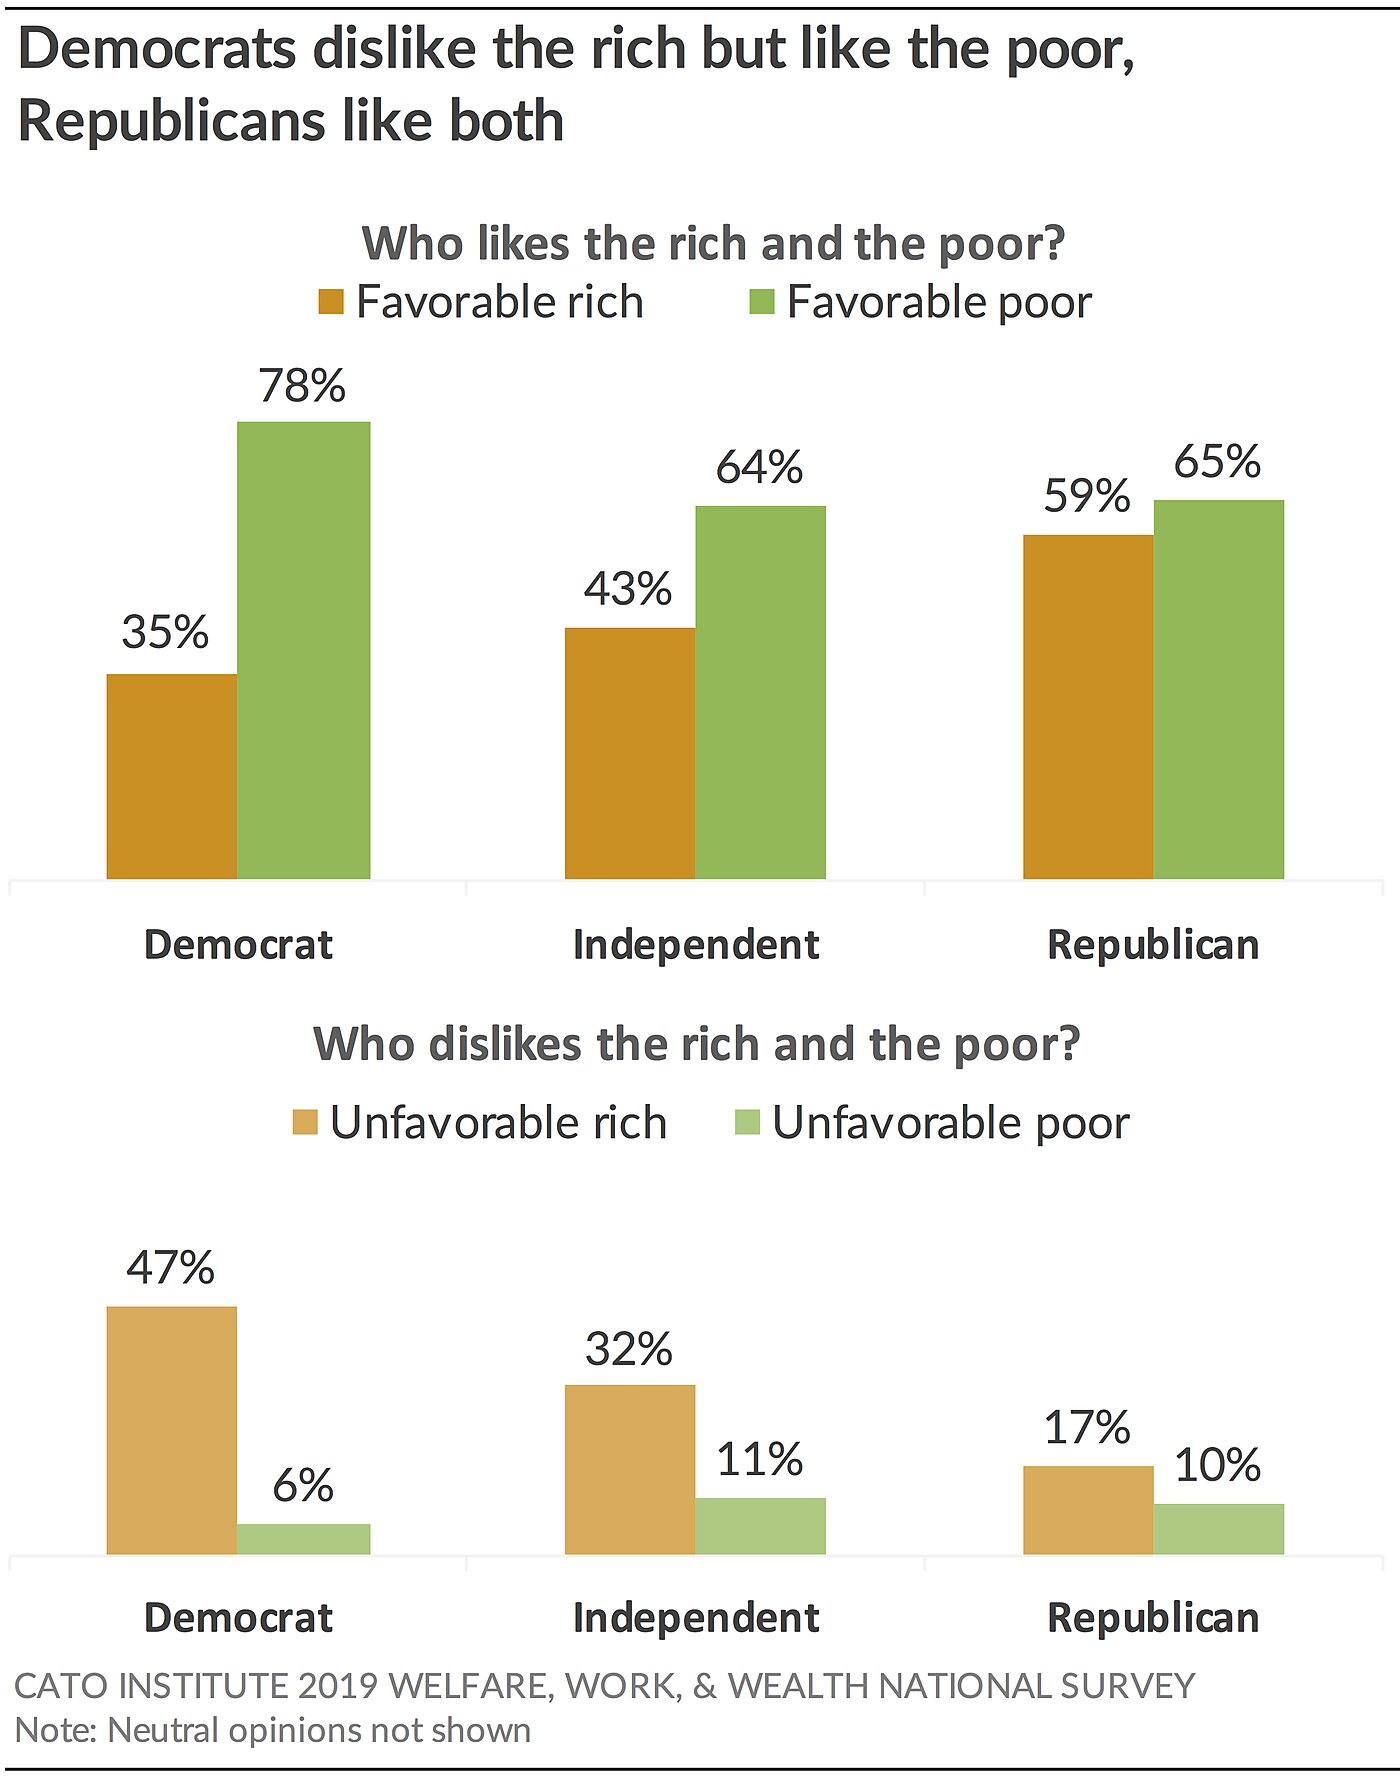 Democrats dislike the rich but like the poor